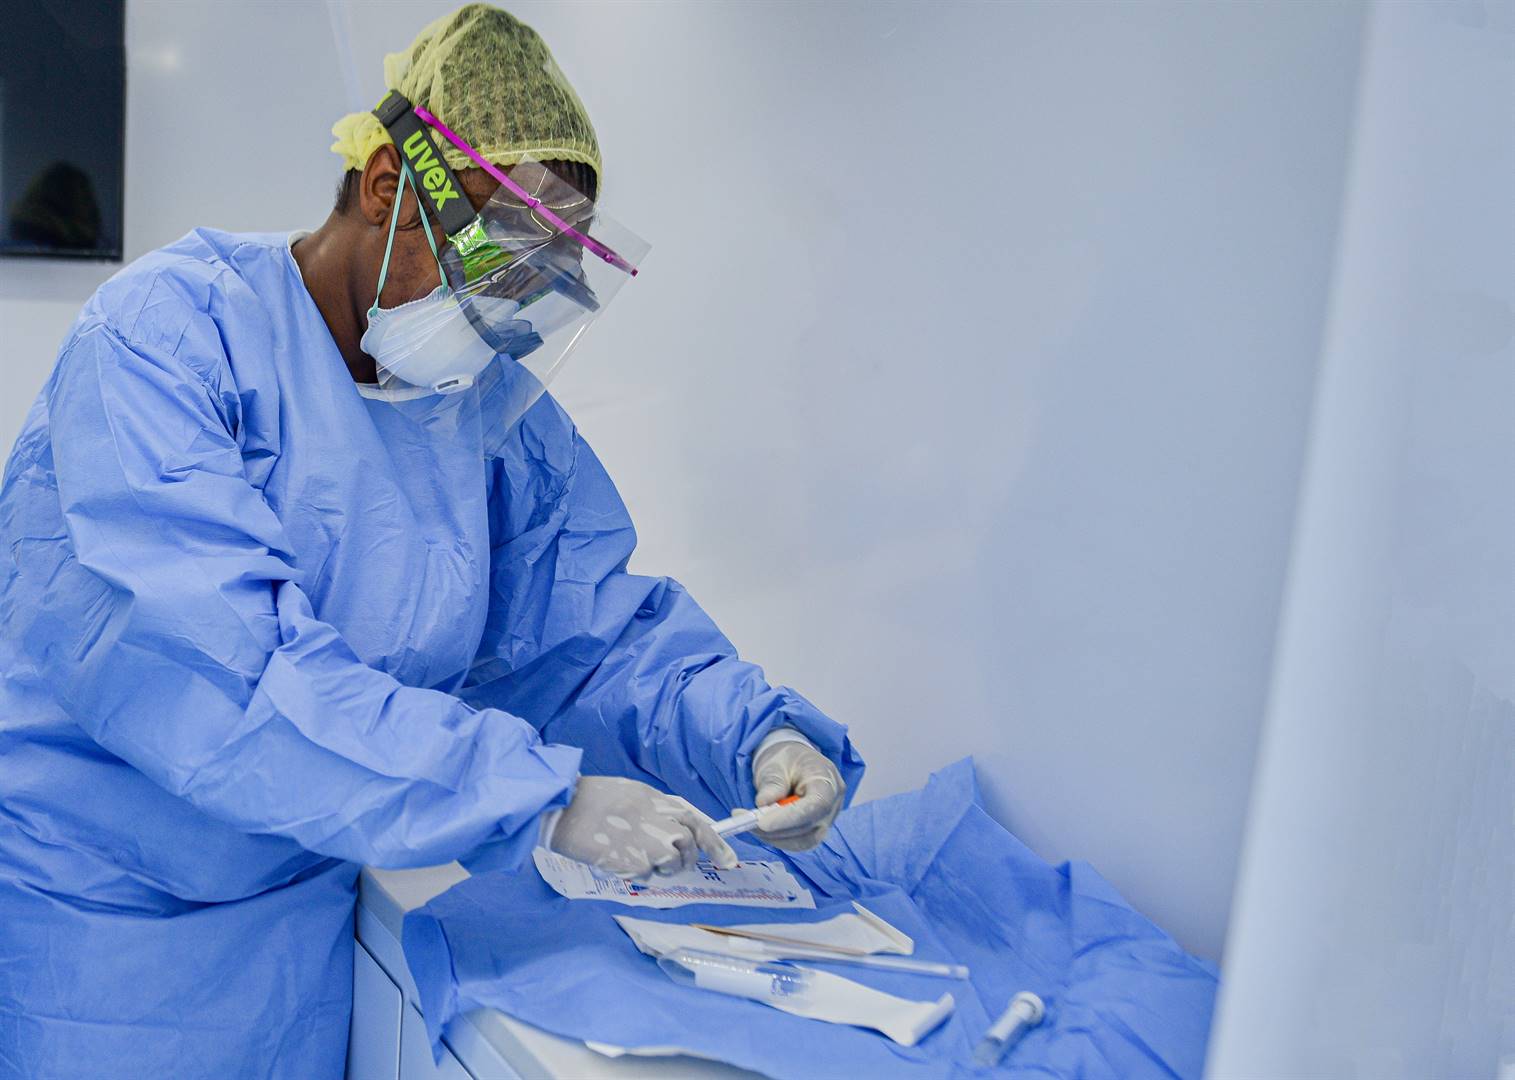 A doctor in protective gear prepares her equipment before testing a patient for Covid-19.